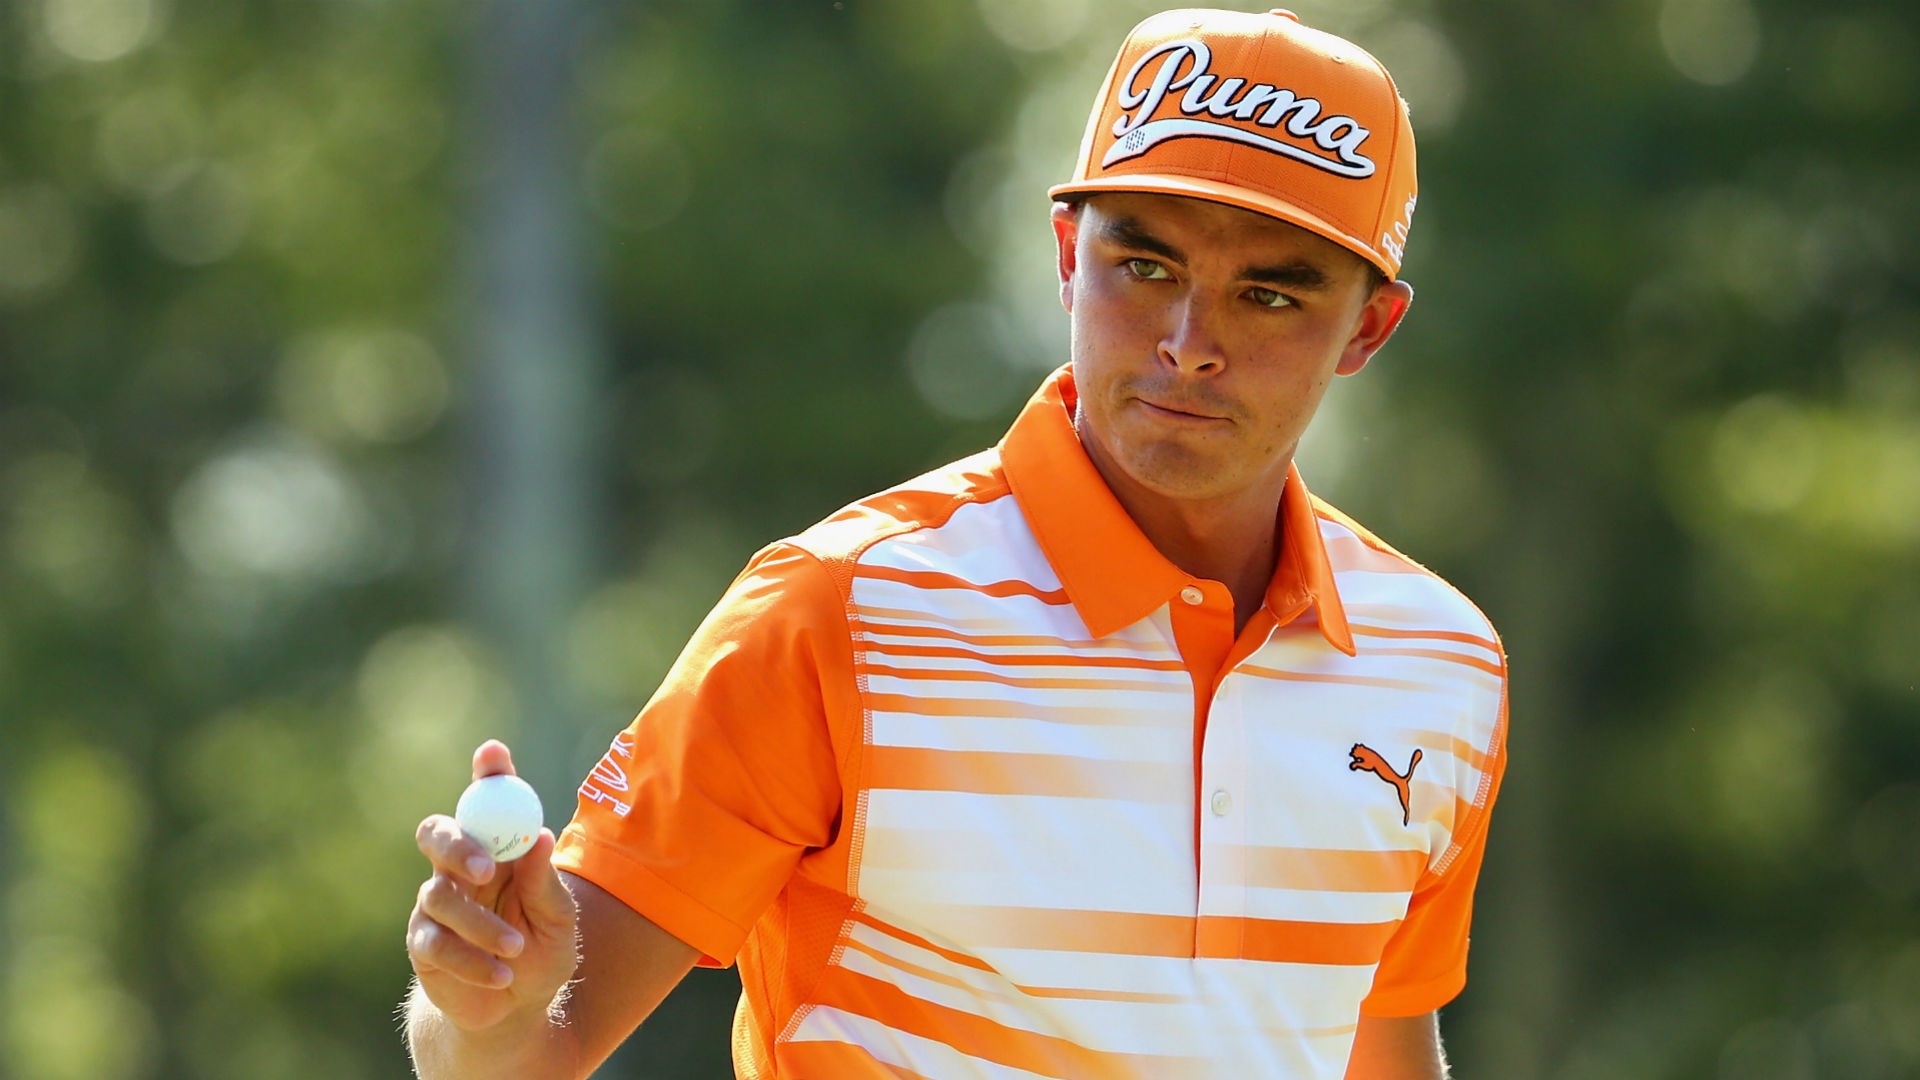 Golfer Rickie Fowler says he lacks 'Big Three' credentials | Other ...